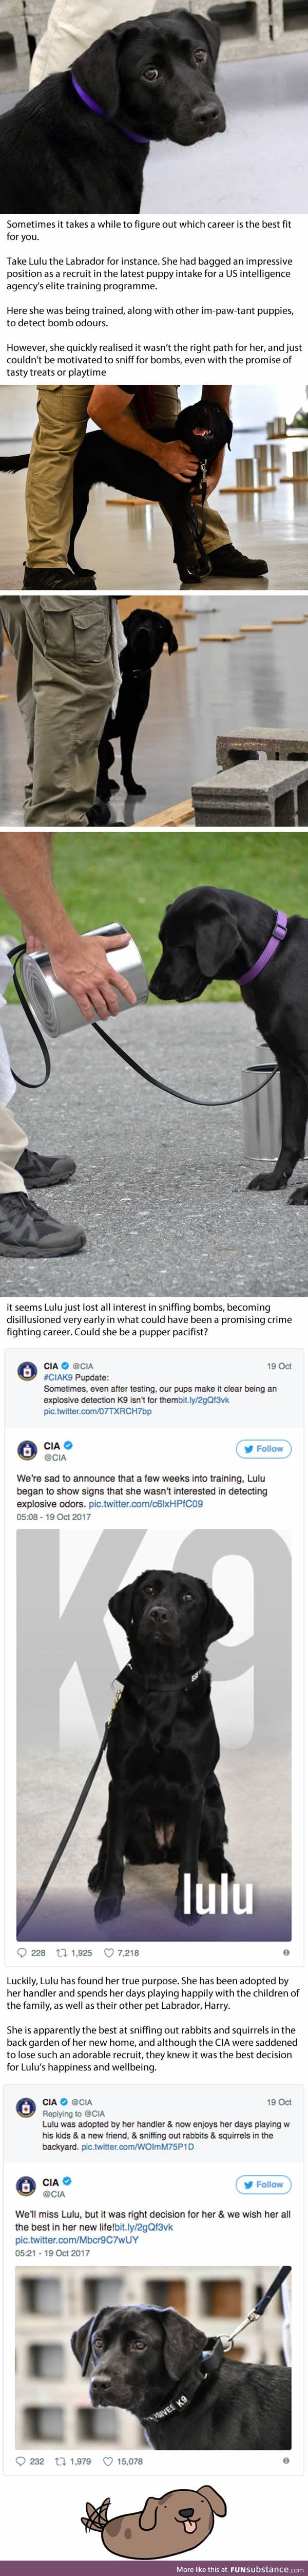 Dog Got Fired From CIA Because Sniffing Bombs Just Wasn't Her Thing